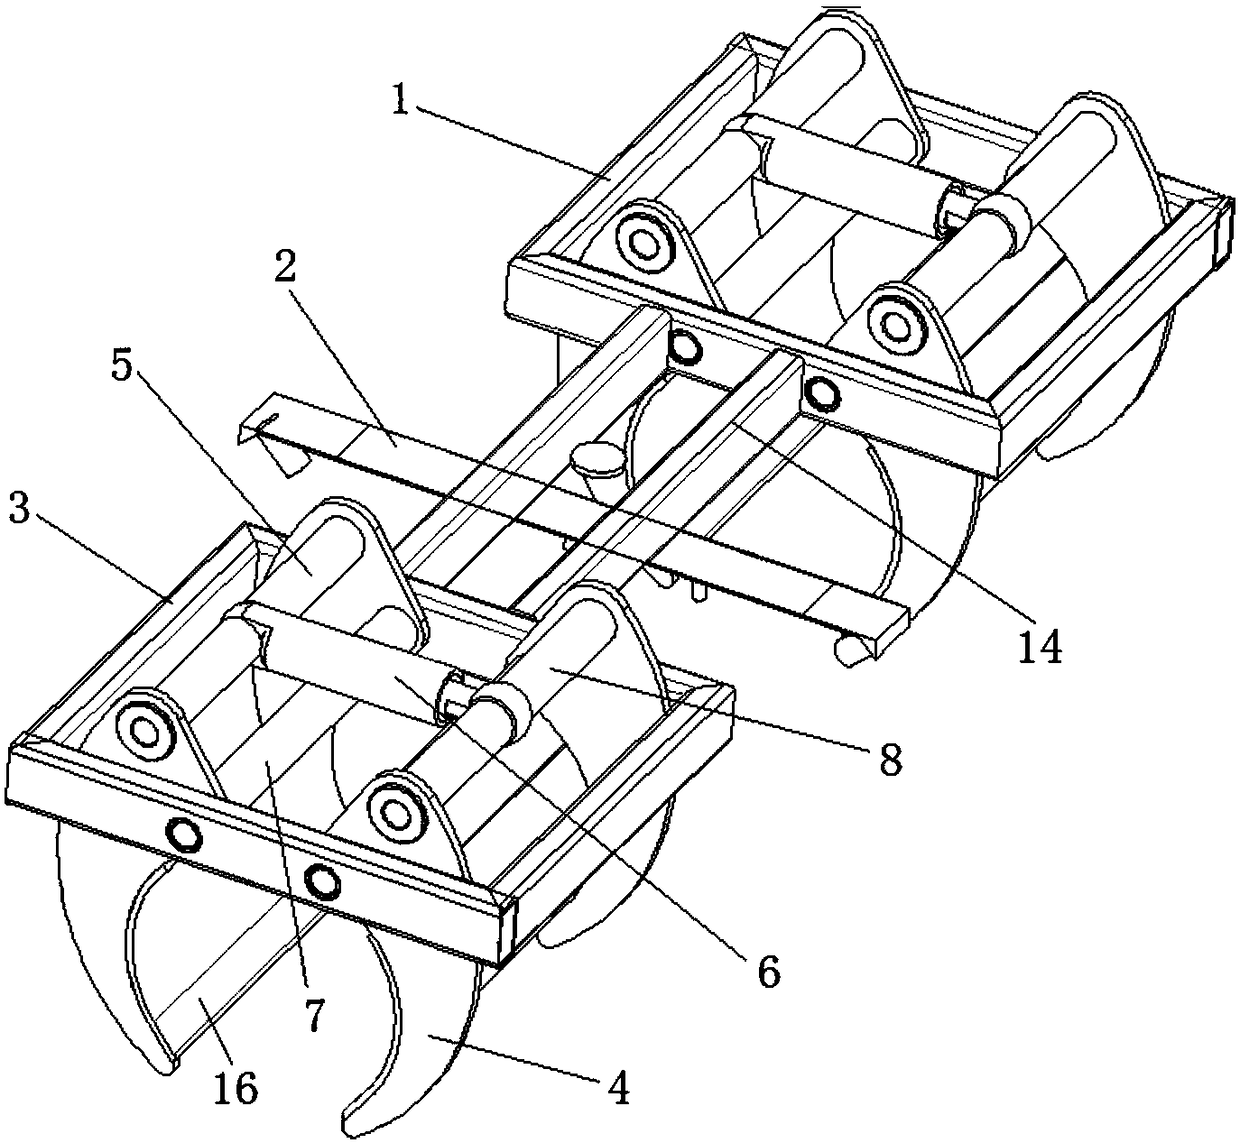 Hydraulic mechanical gripper having identification positioning function and capable of grabbing rods of various sizes